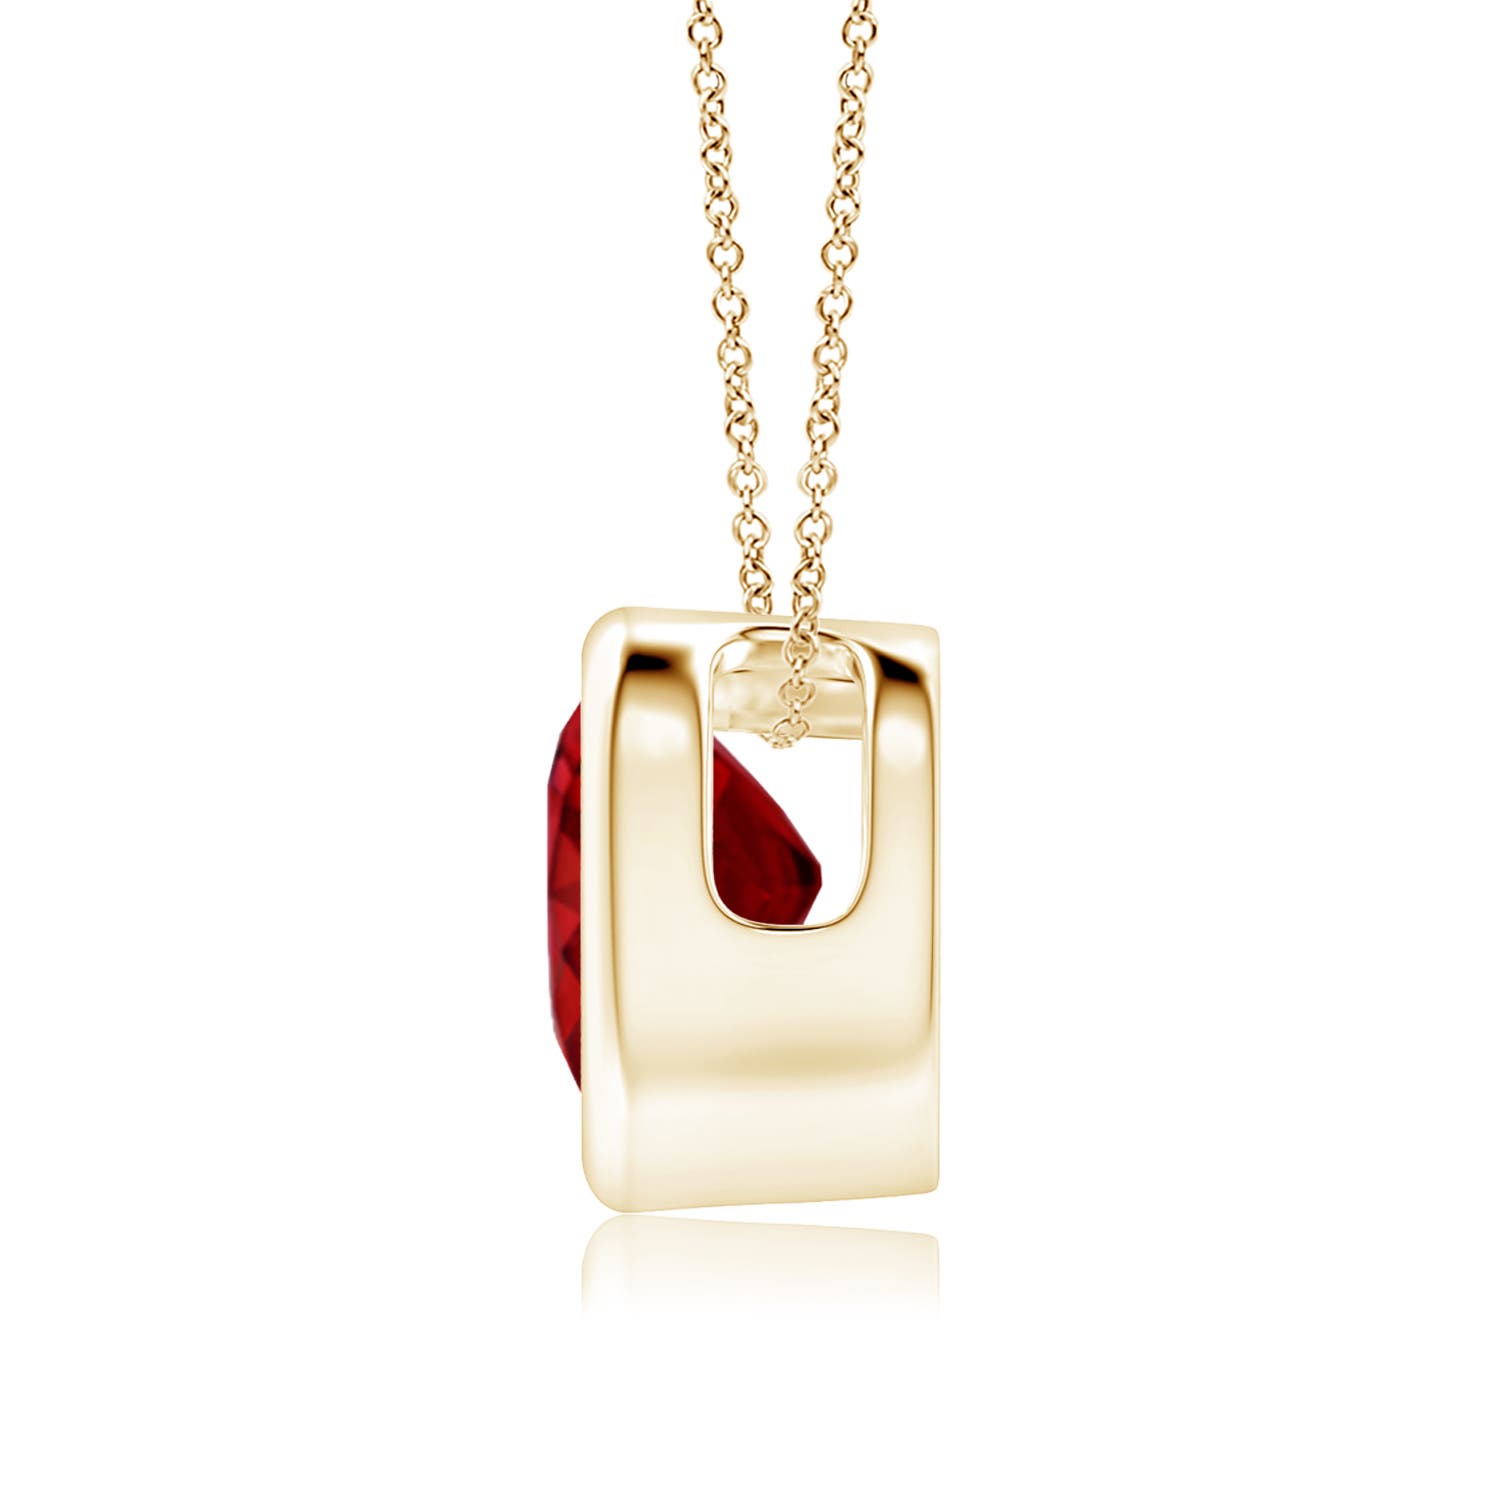 AAAA - Ruby / 0.8 CT / 14 KT Yellow Gold